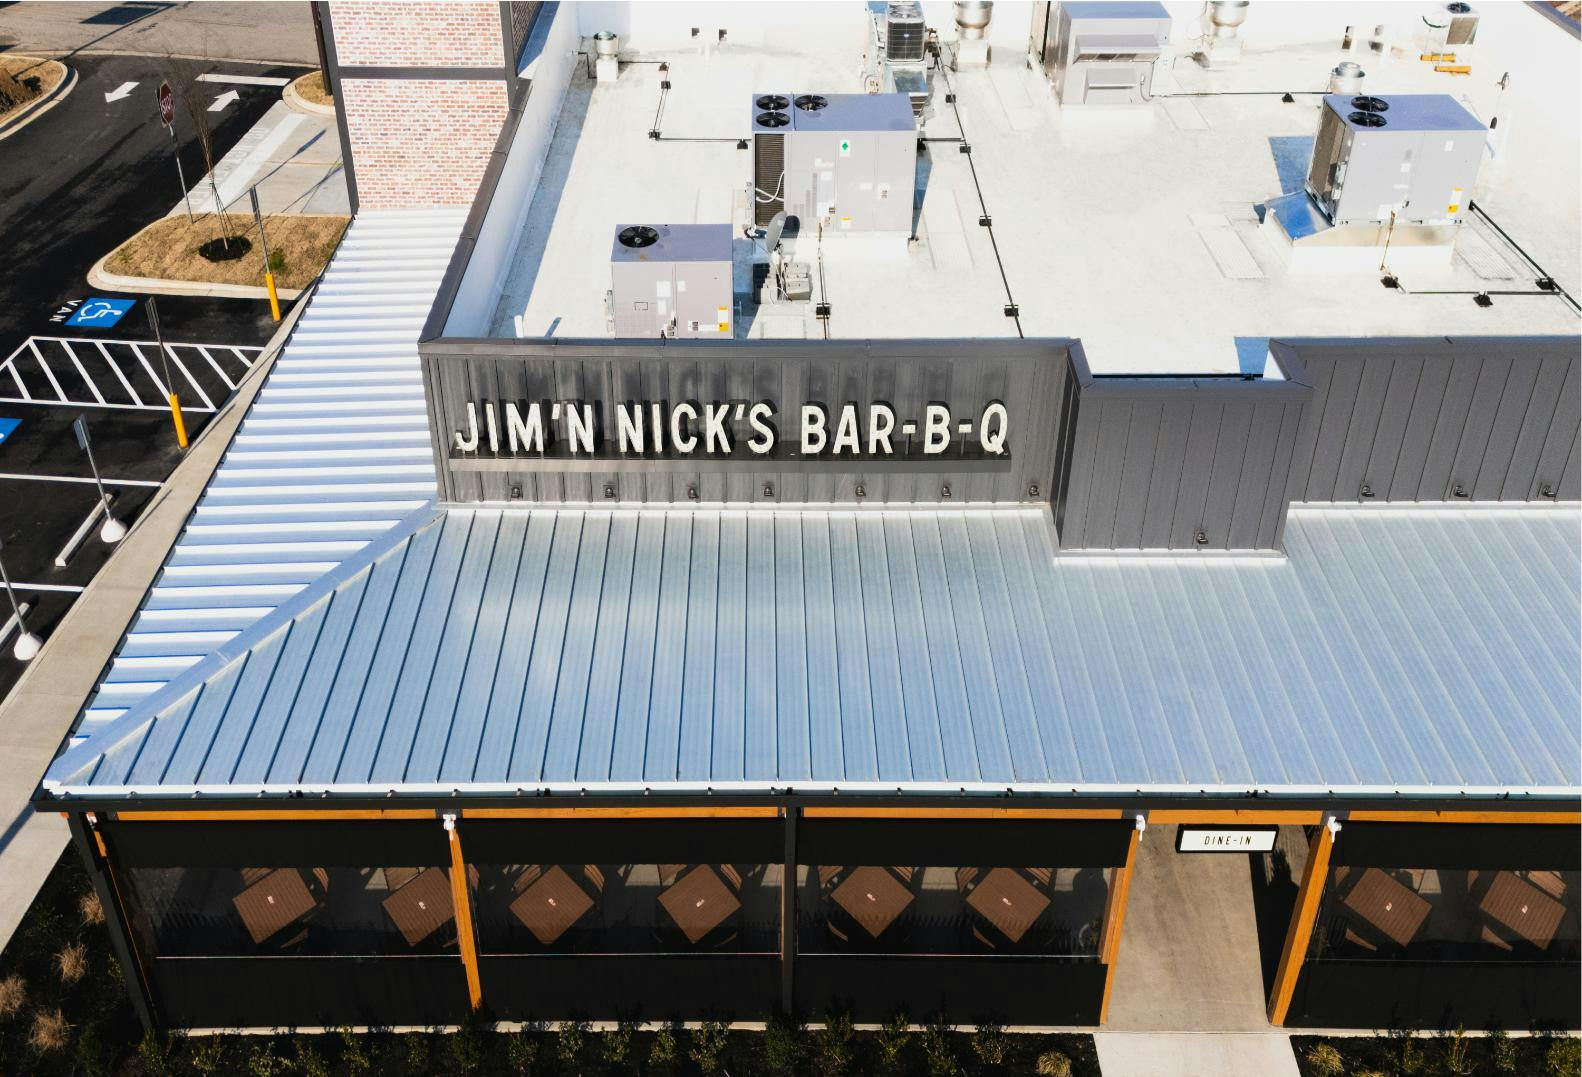 Jim 'n Nicks BBQ Restaurant Roof | Flat Roofing | Low Slope Roofing | Metal Roofing | Commercial Standing Seam Metal Roof | Commercial Roofing Solutions | Bulloch County Commercial Roofers | New Construction Commercial Roofer